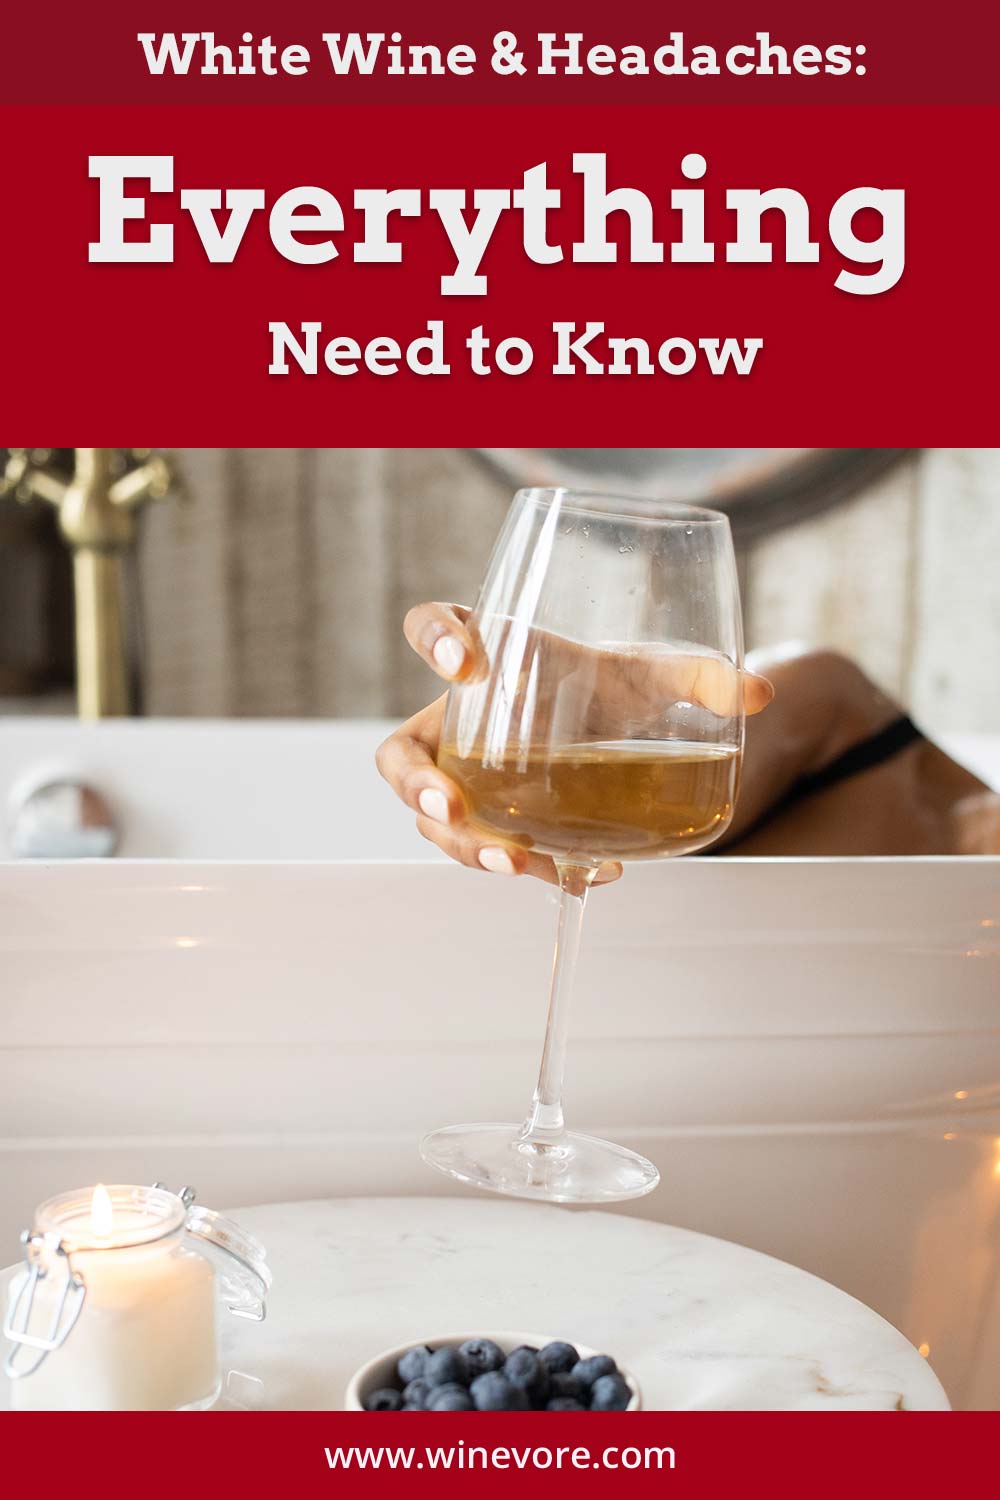 Person in a bathtub grabbing a wine glass from a table with a candle and berries on it - White Wine & Headaches.